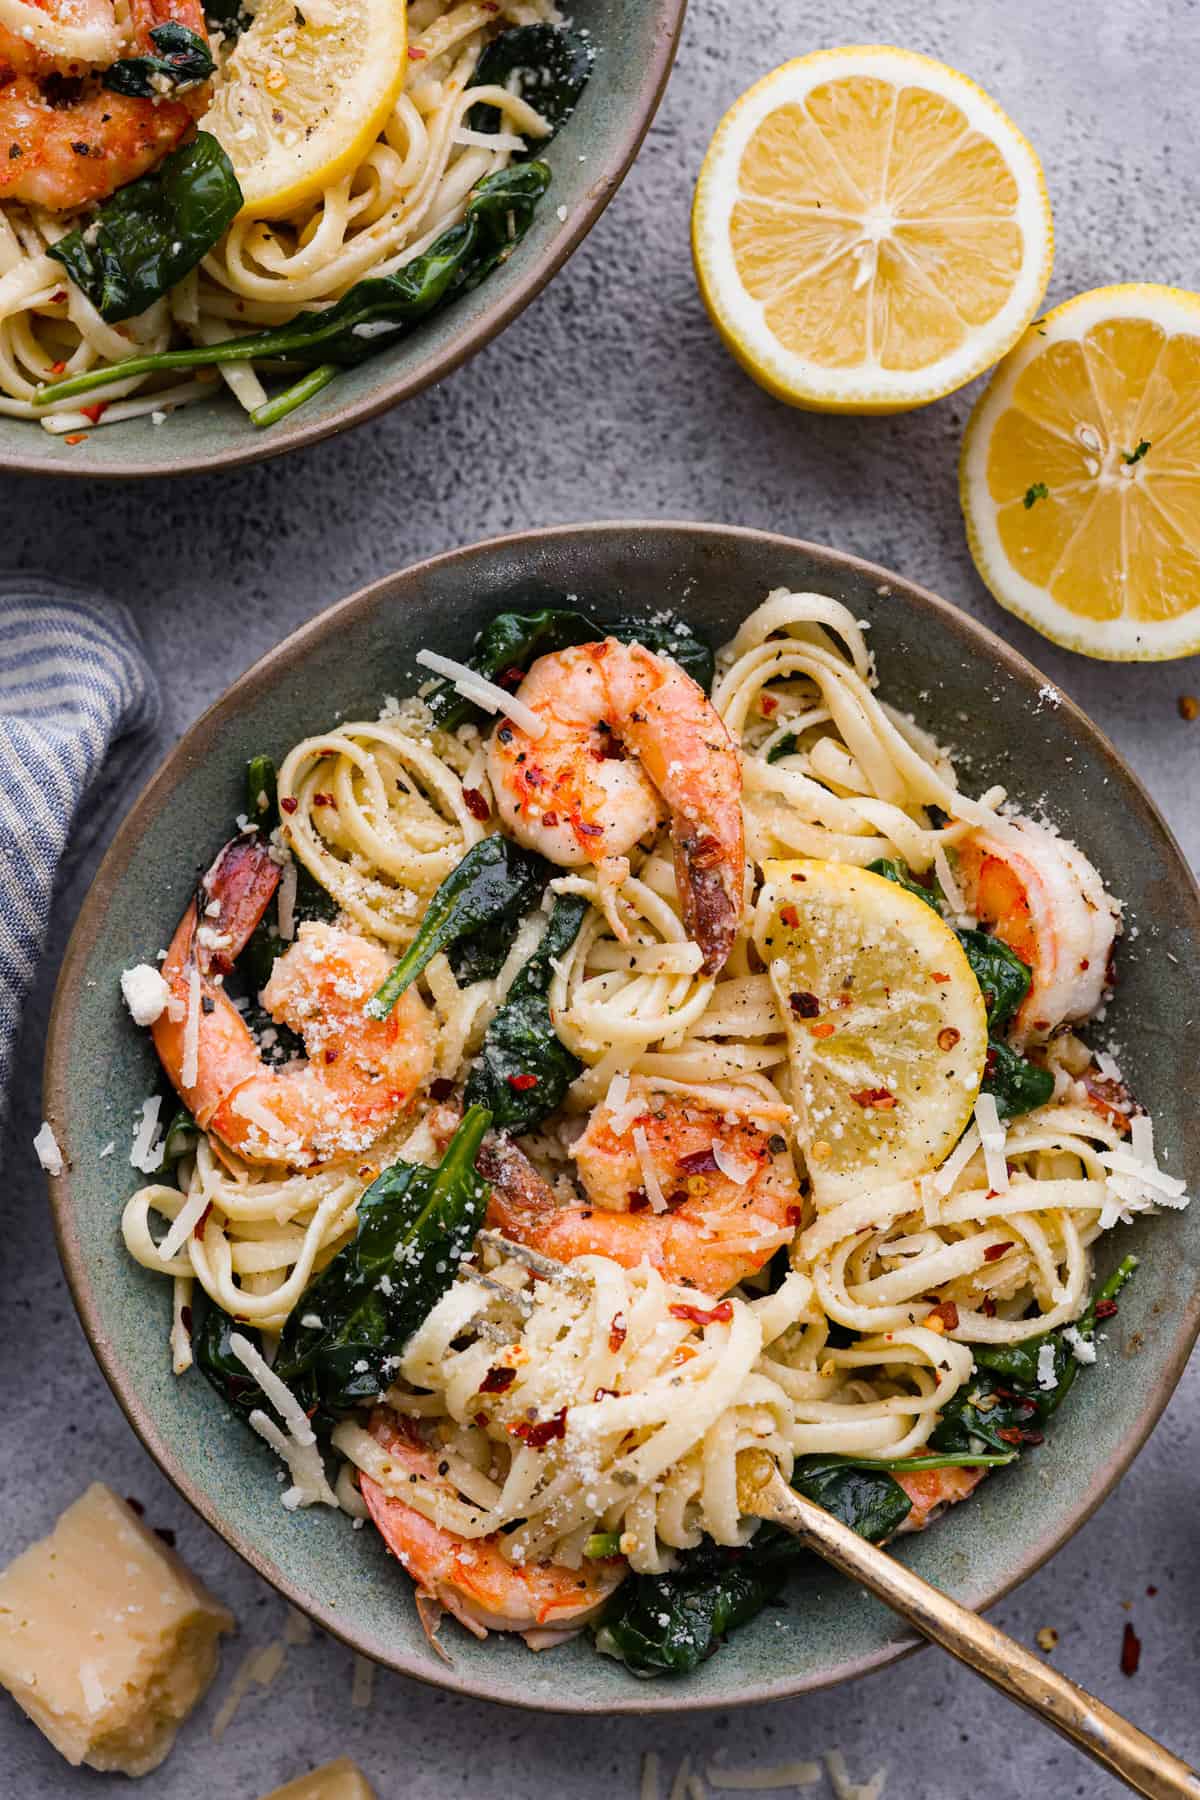 Easy Shrimp Linguine - Simply Home Cooked